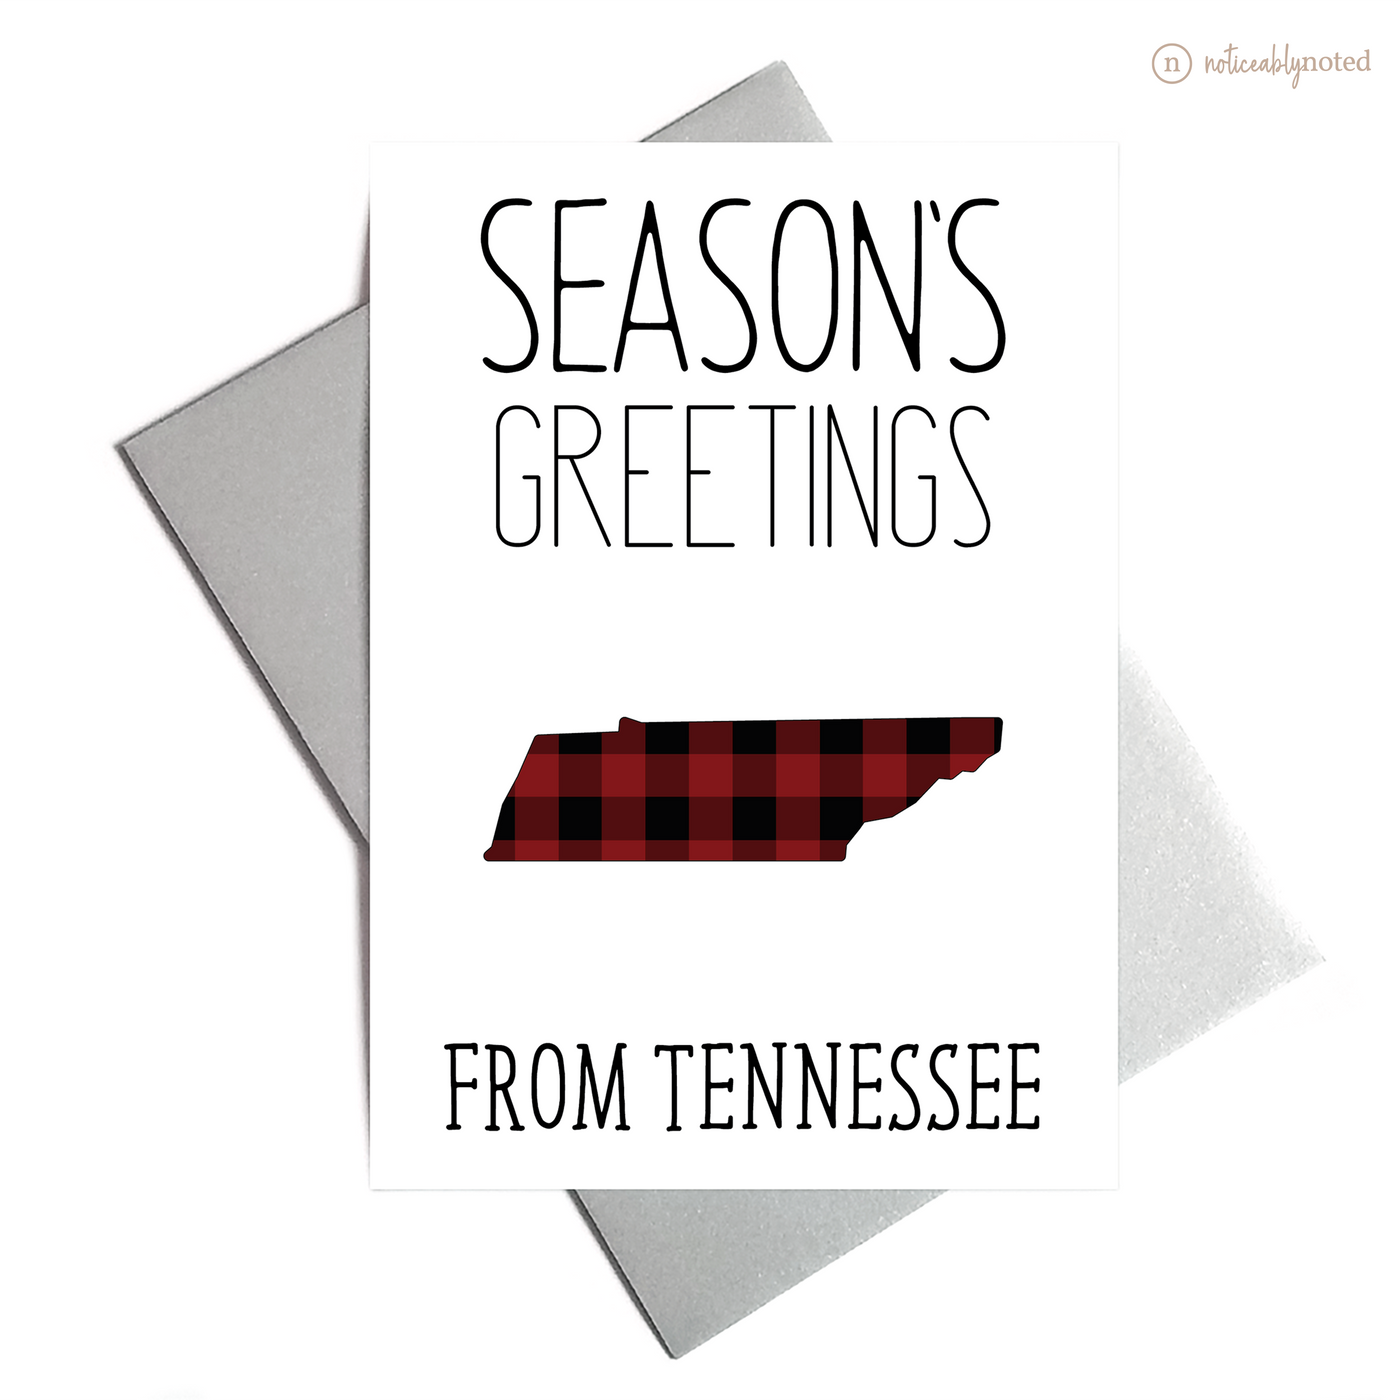 Tennessee Holiday Card - Season's Greetings | Noticeably Noted